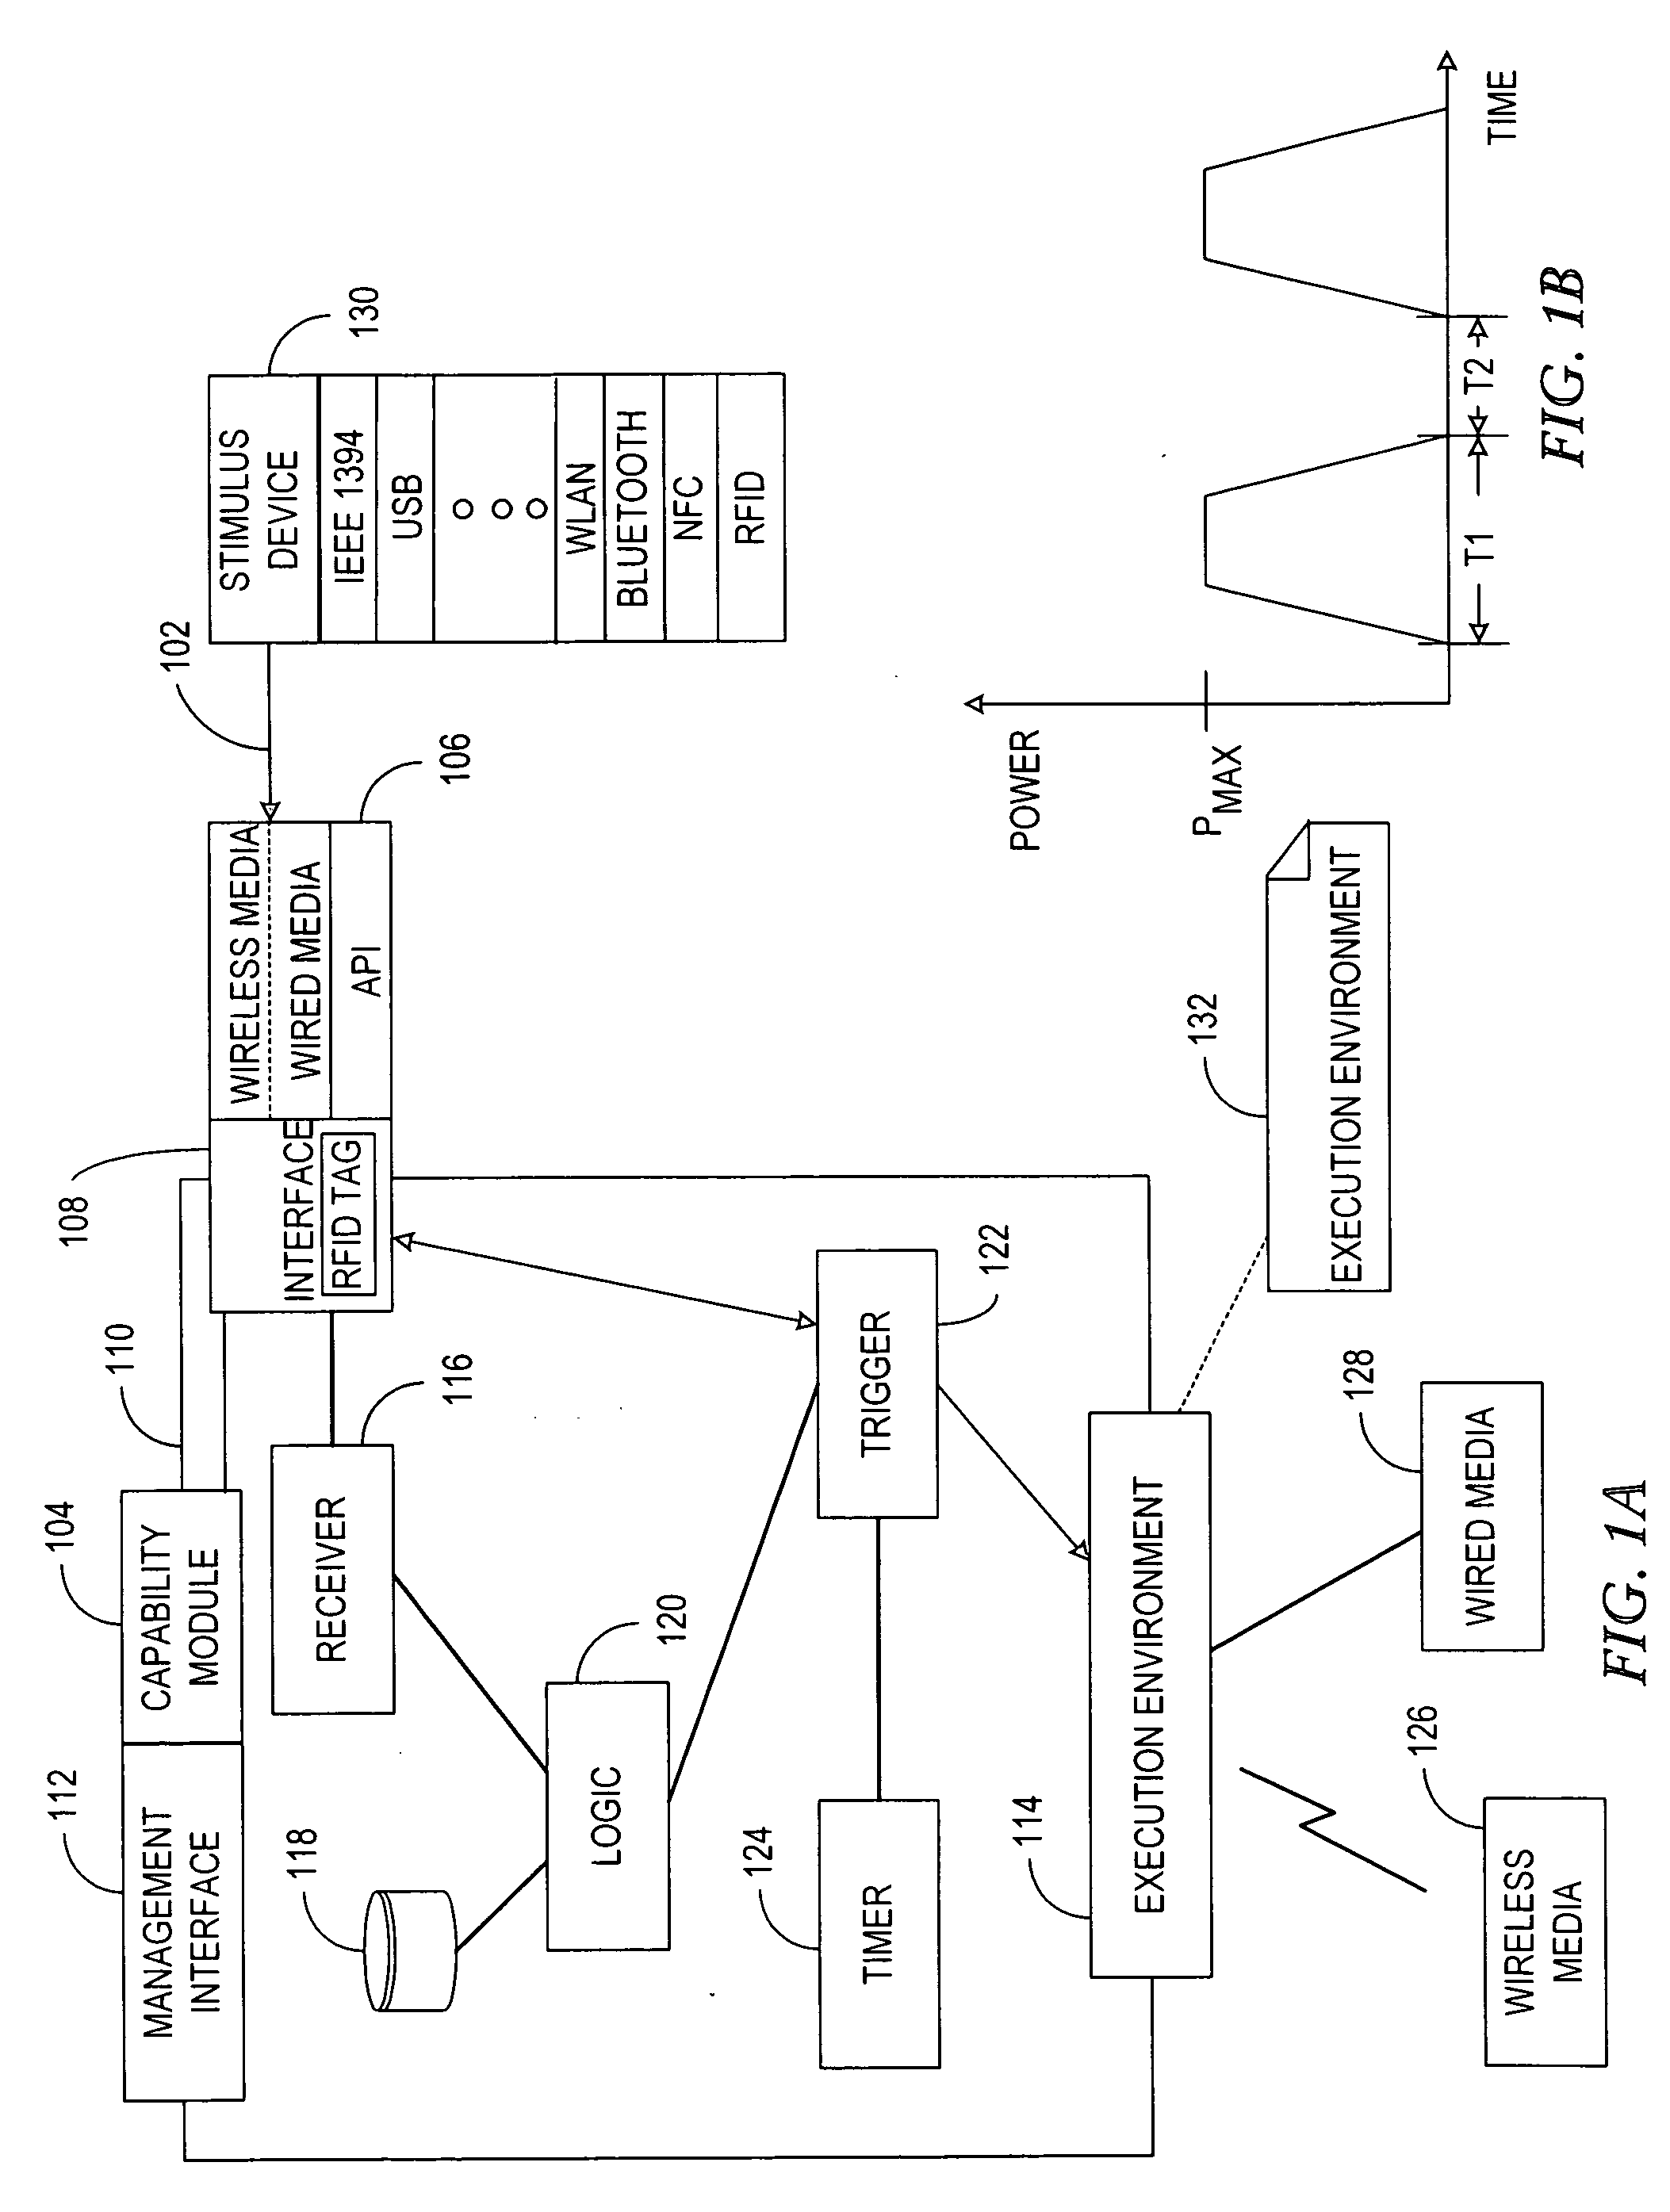 System and method for dynamic interface management